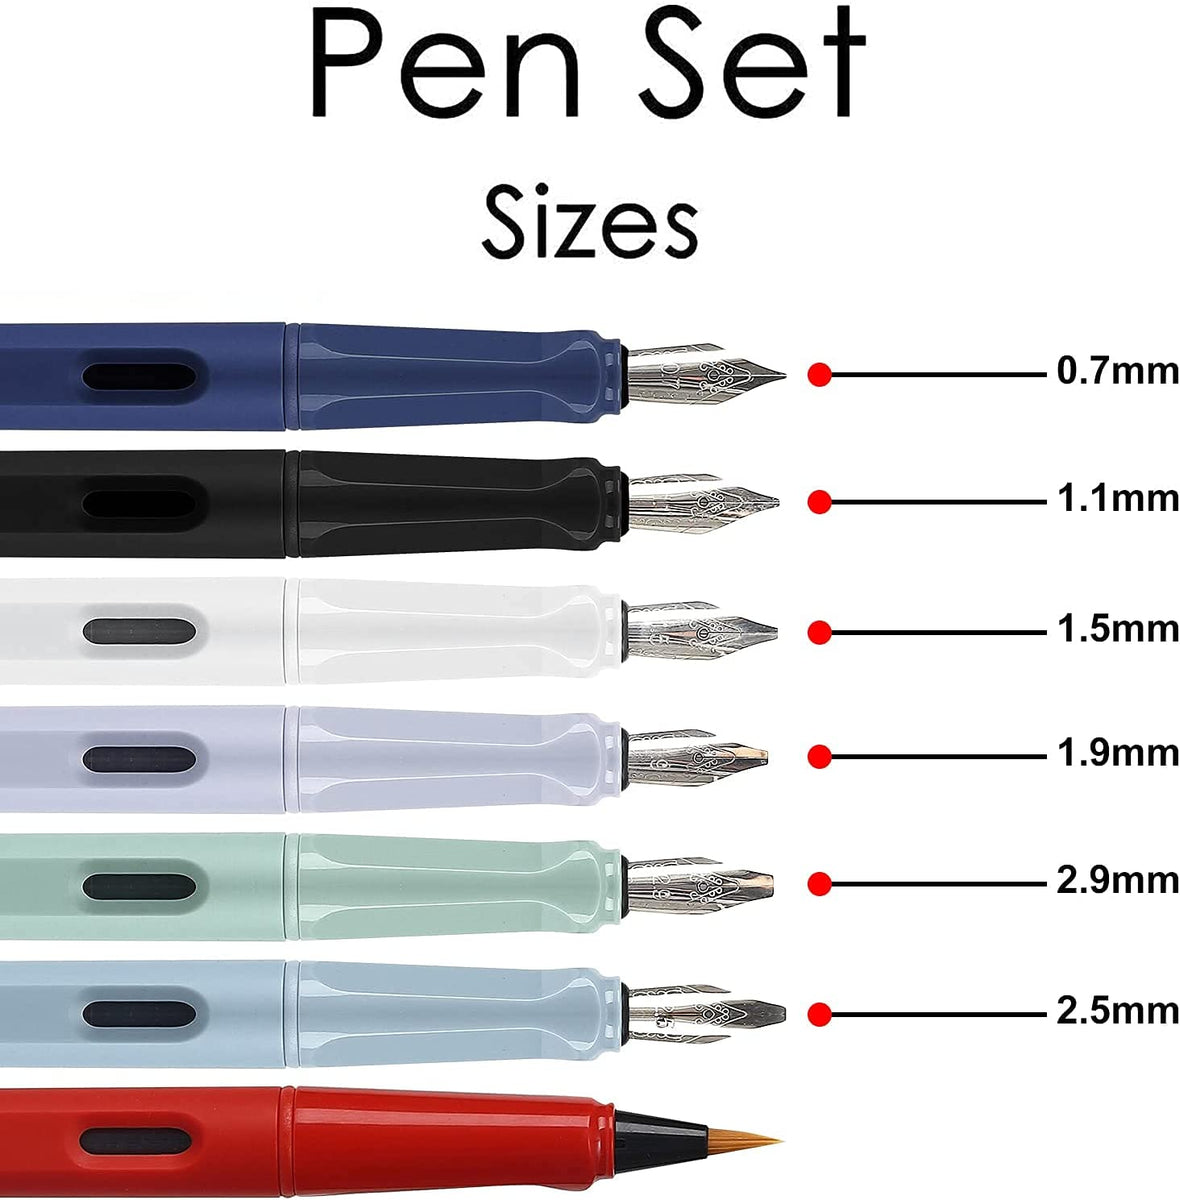 Calligraphy Pen Set, 7 Calligraphy Fountain Pens with Different Nibs a –  hhhouu